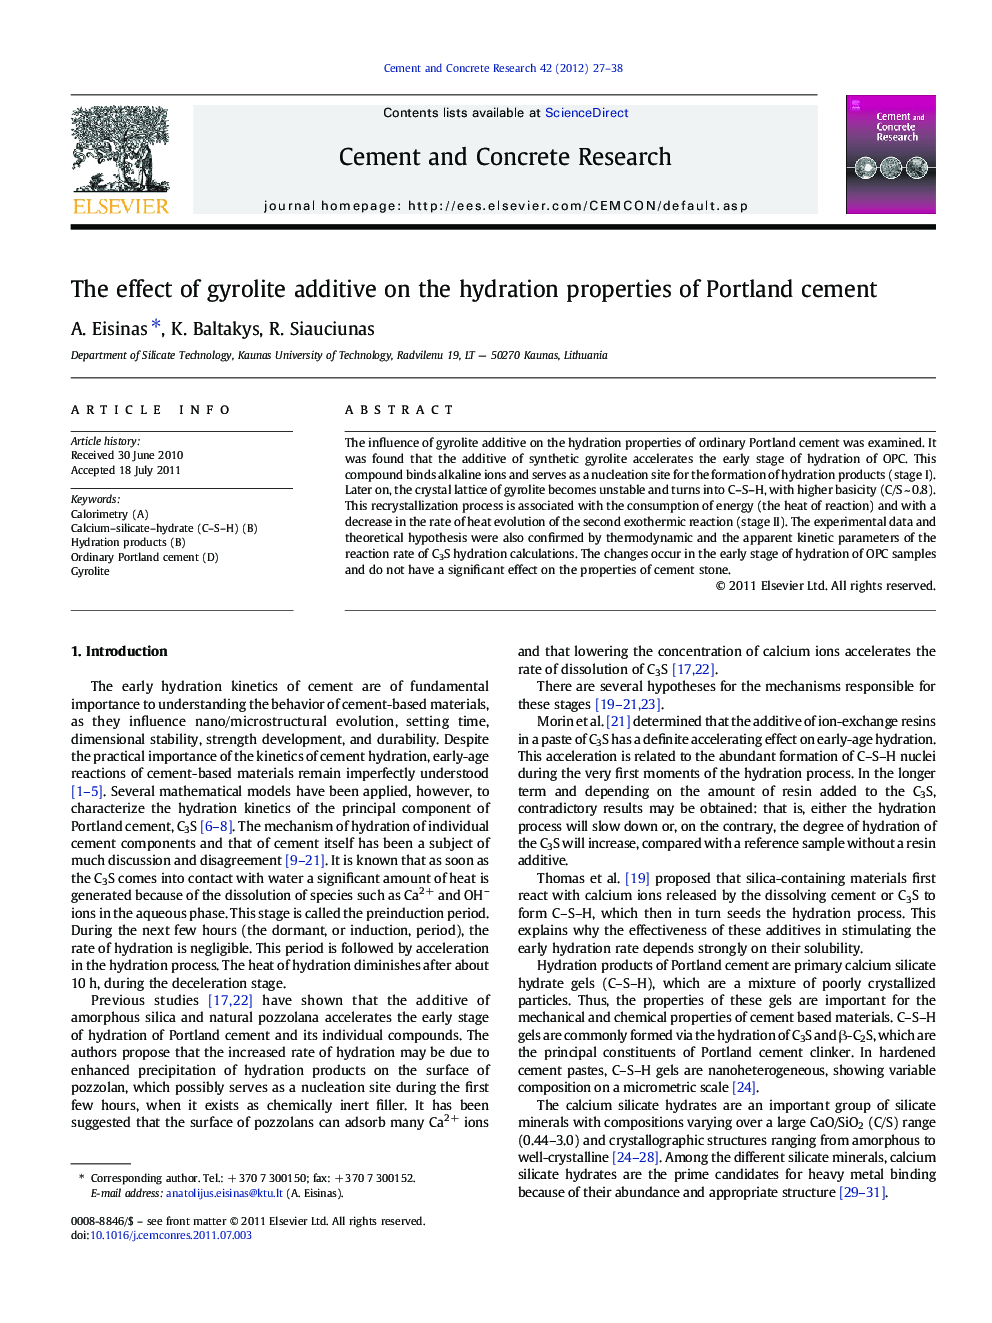 The effect of gyrolite additive on the hydration properties of Portland cement